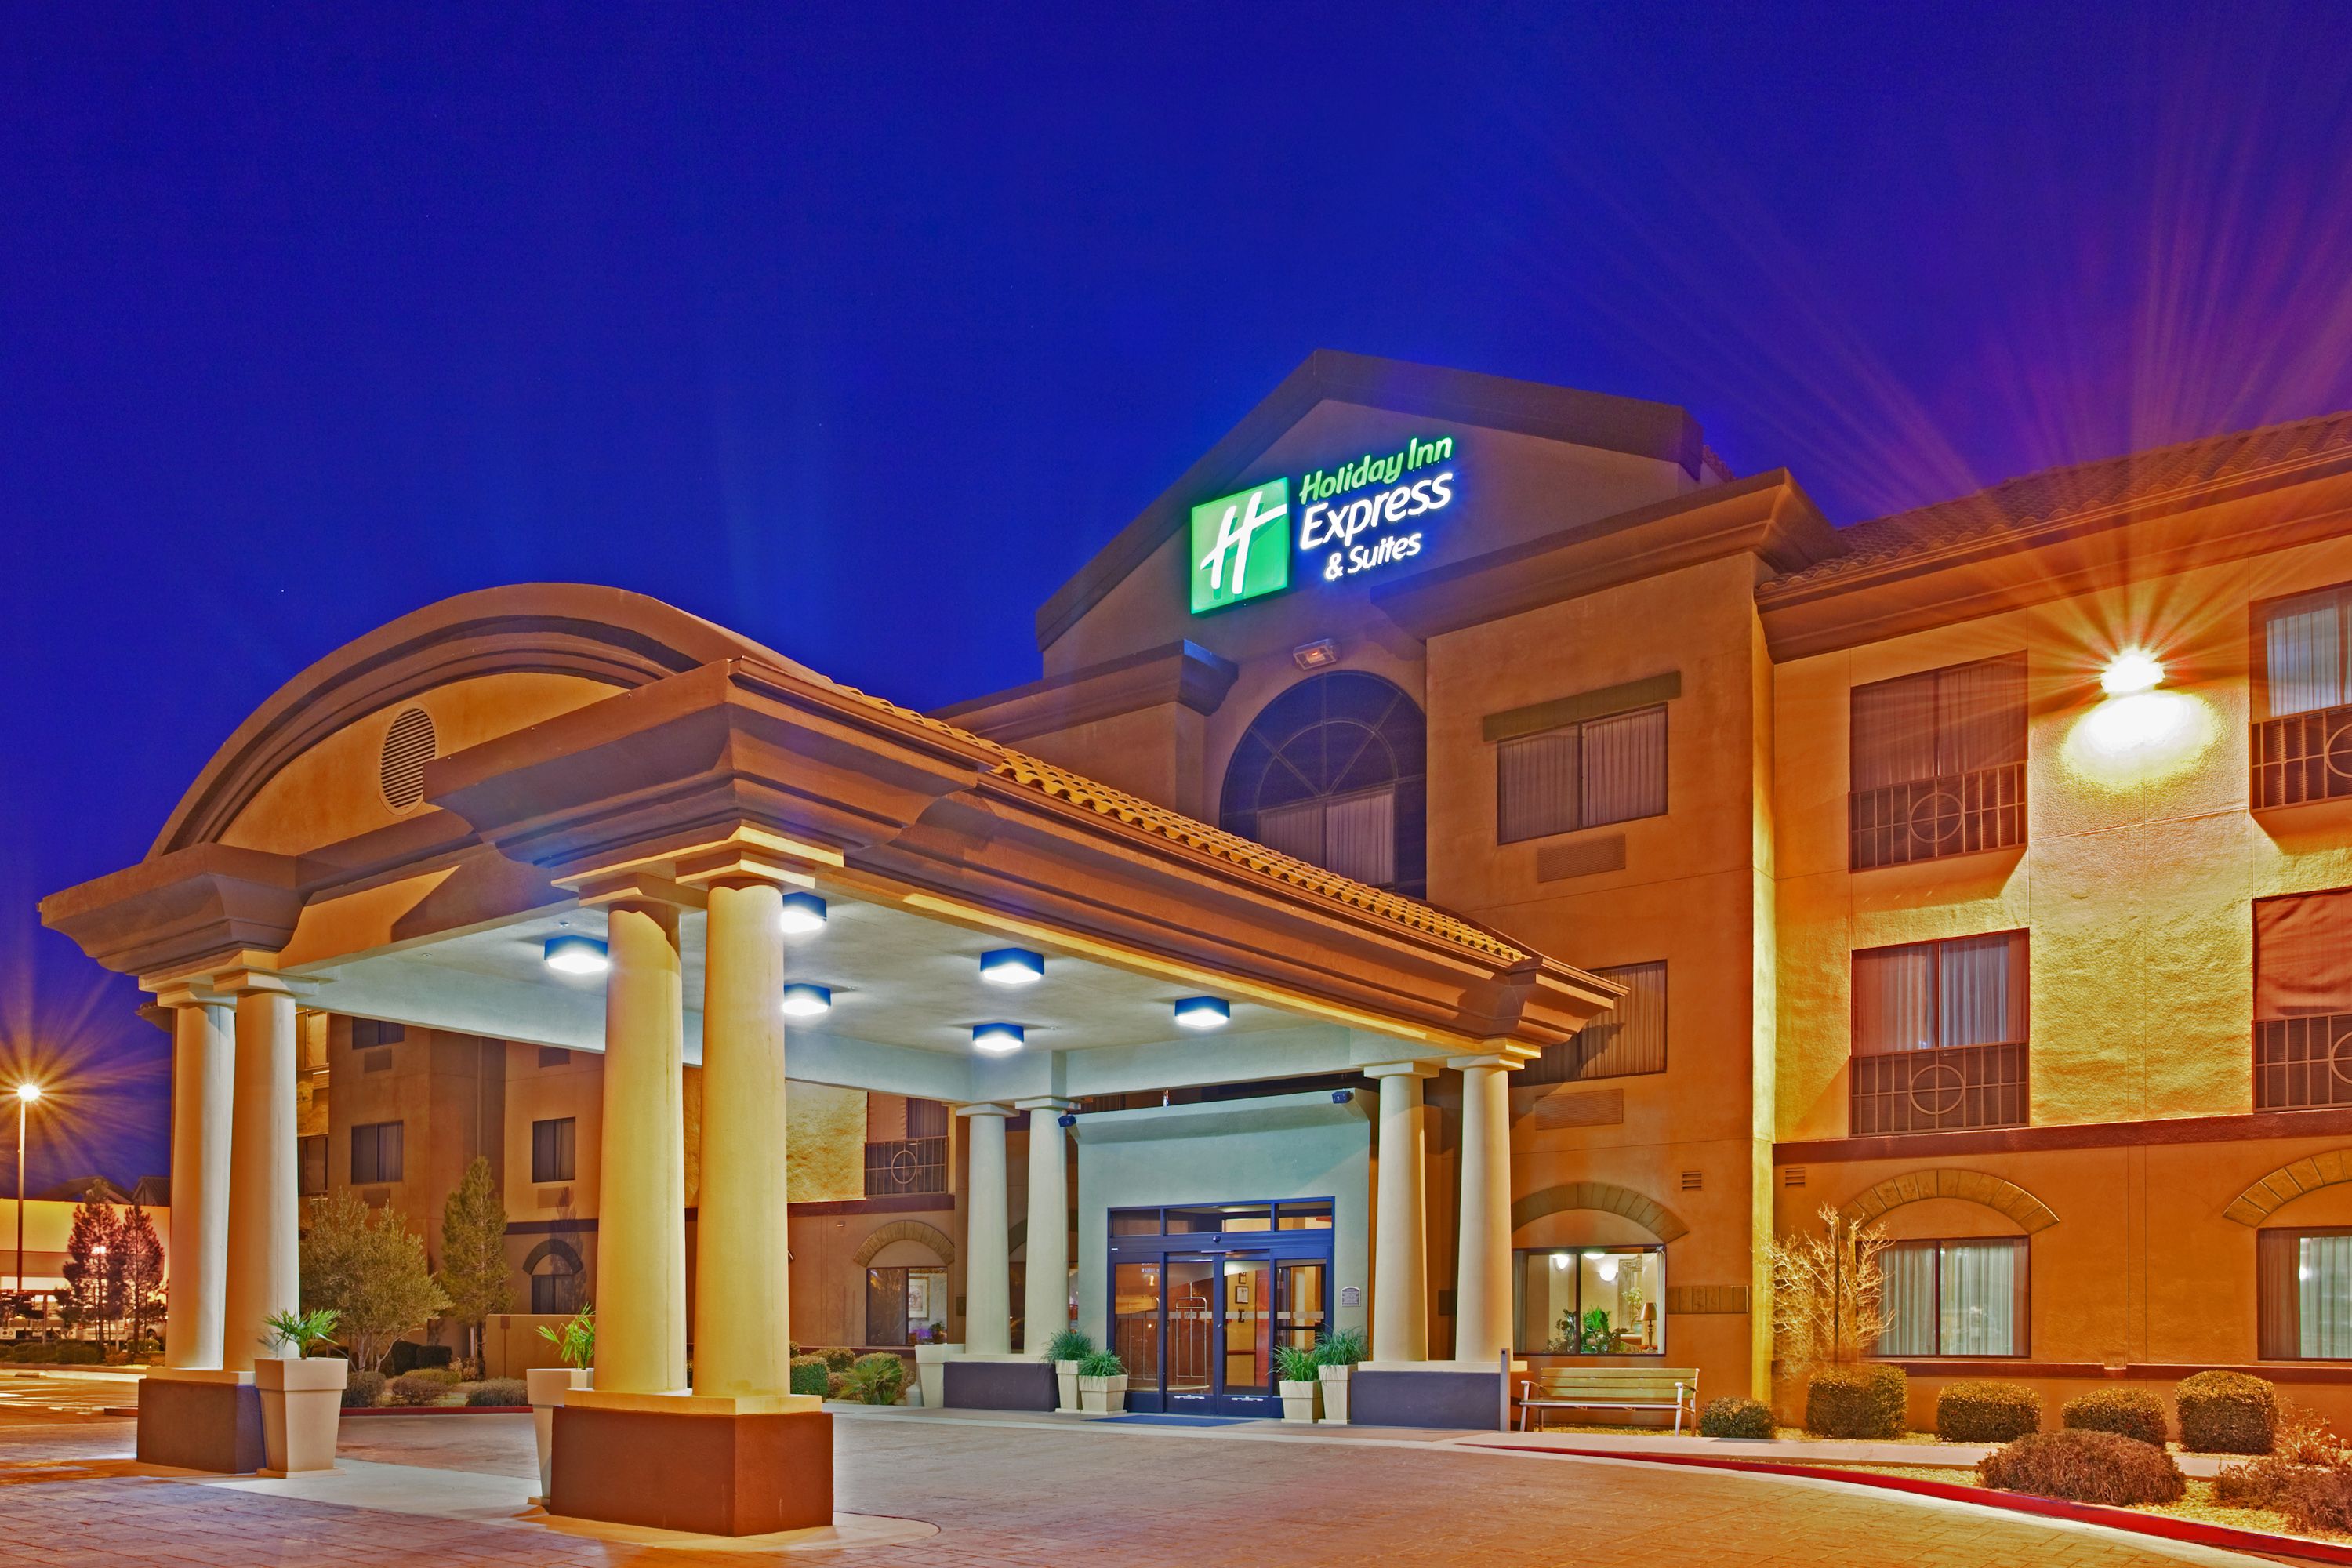 holiday-inn-express-and-suites-barstow-2532273209-original.jpg